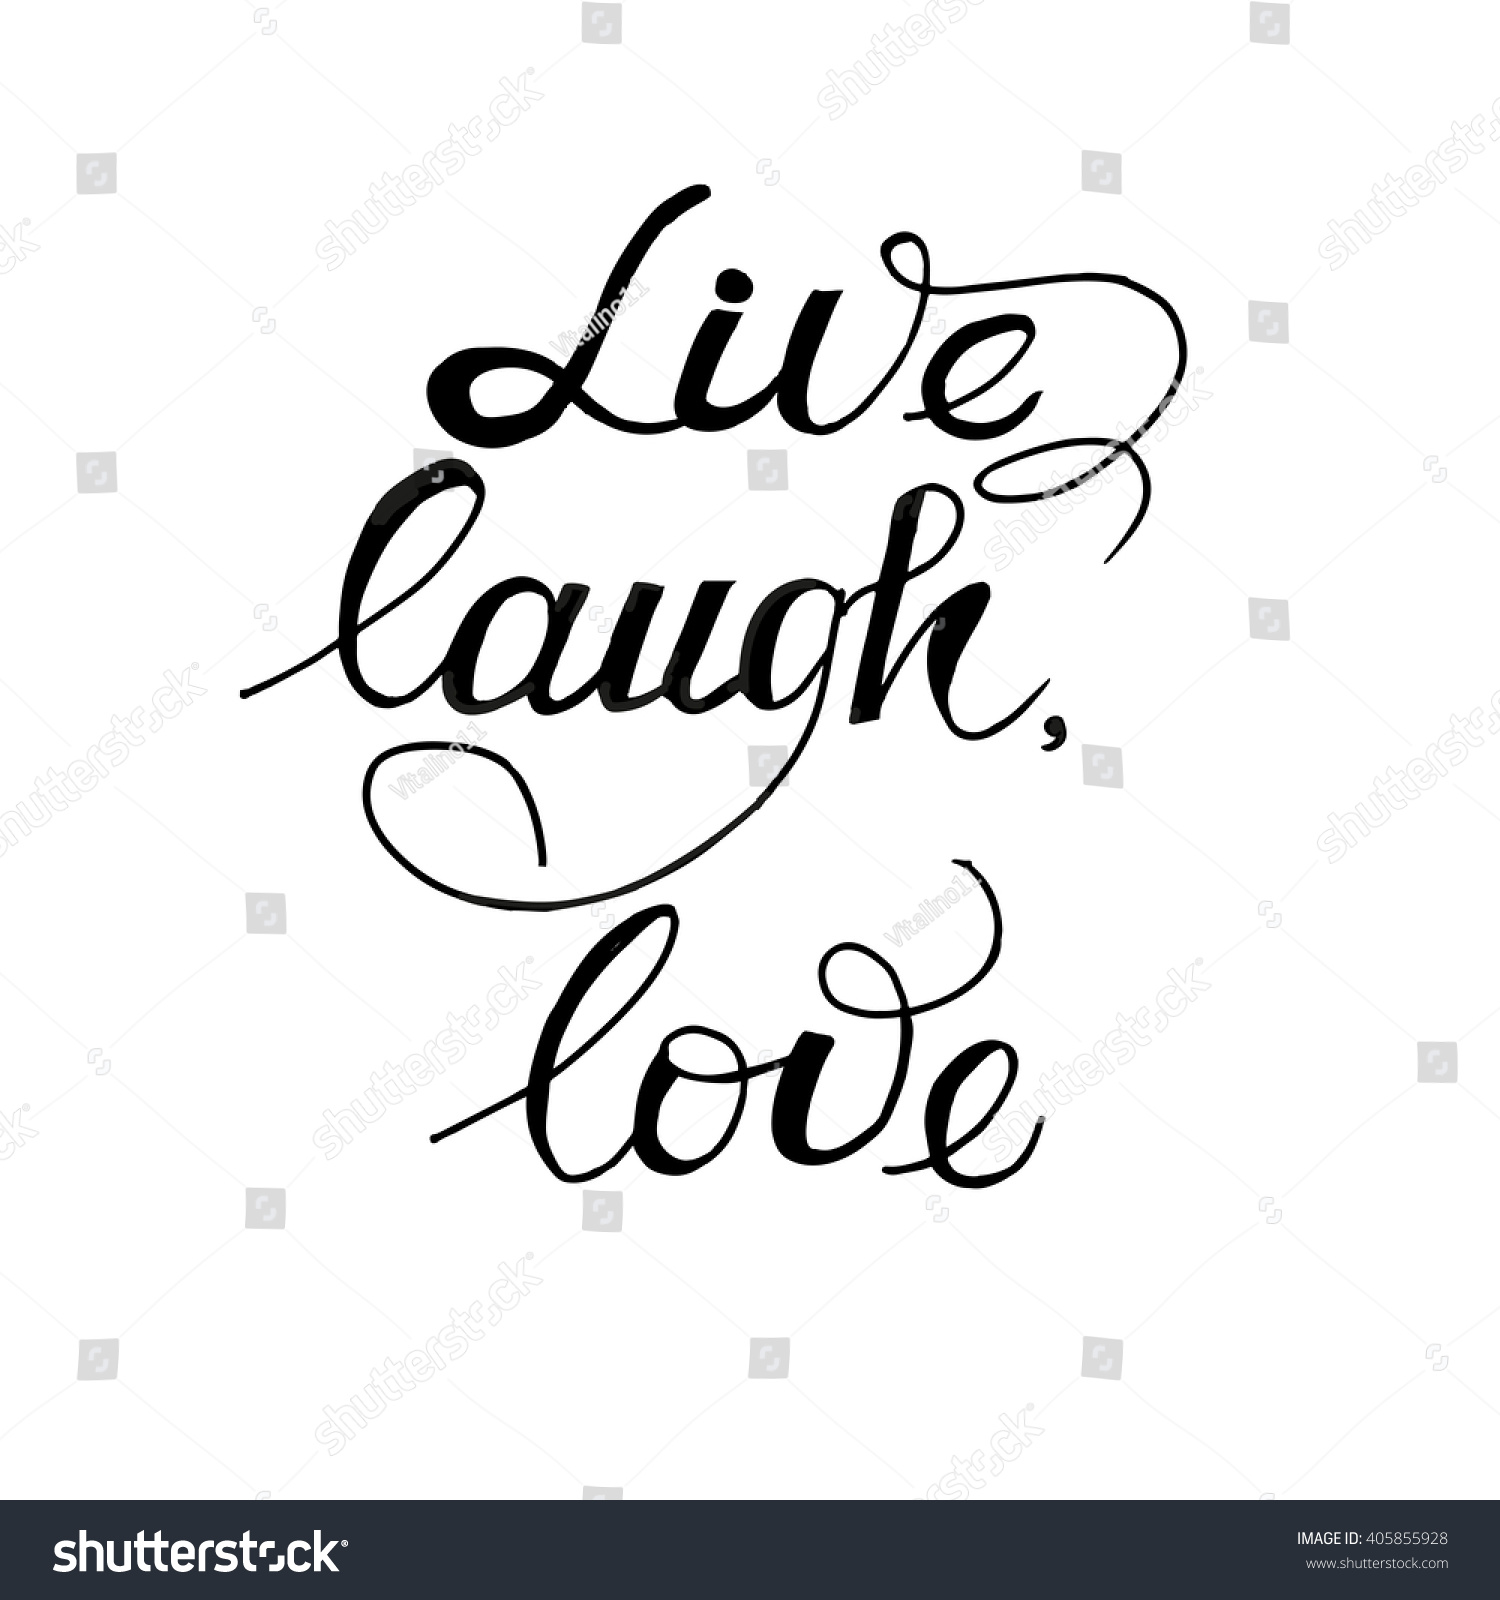 Live laugh love card Hand drawn inspirational quote Isolated on white background